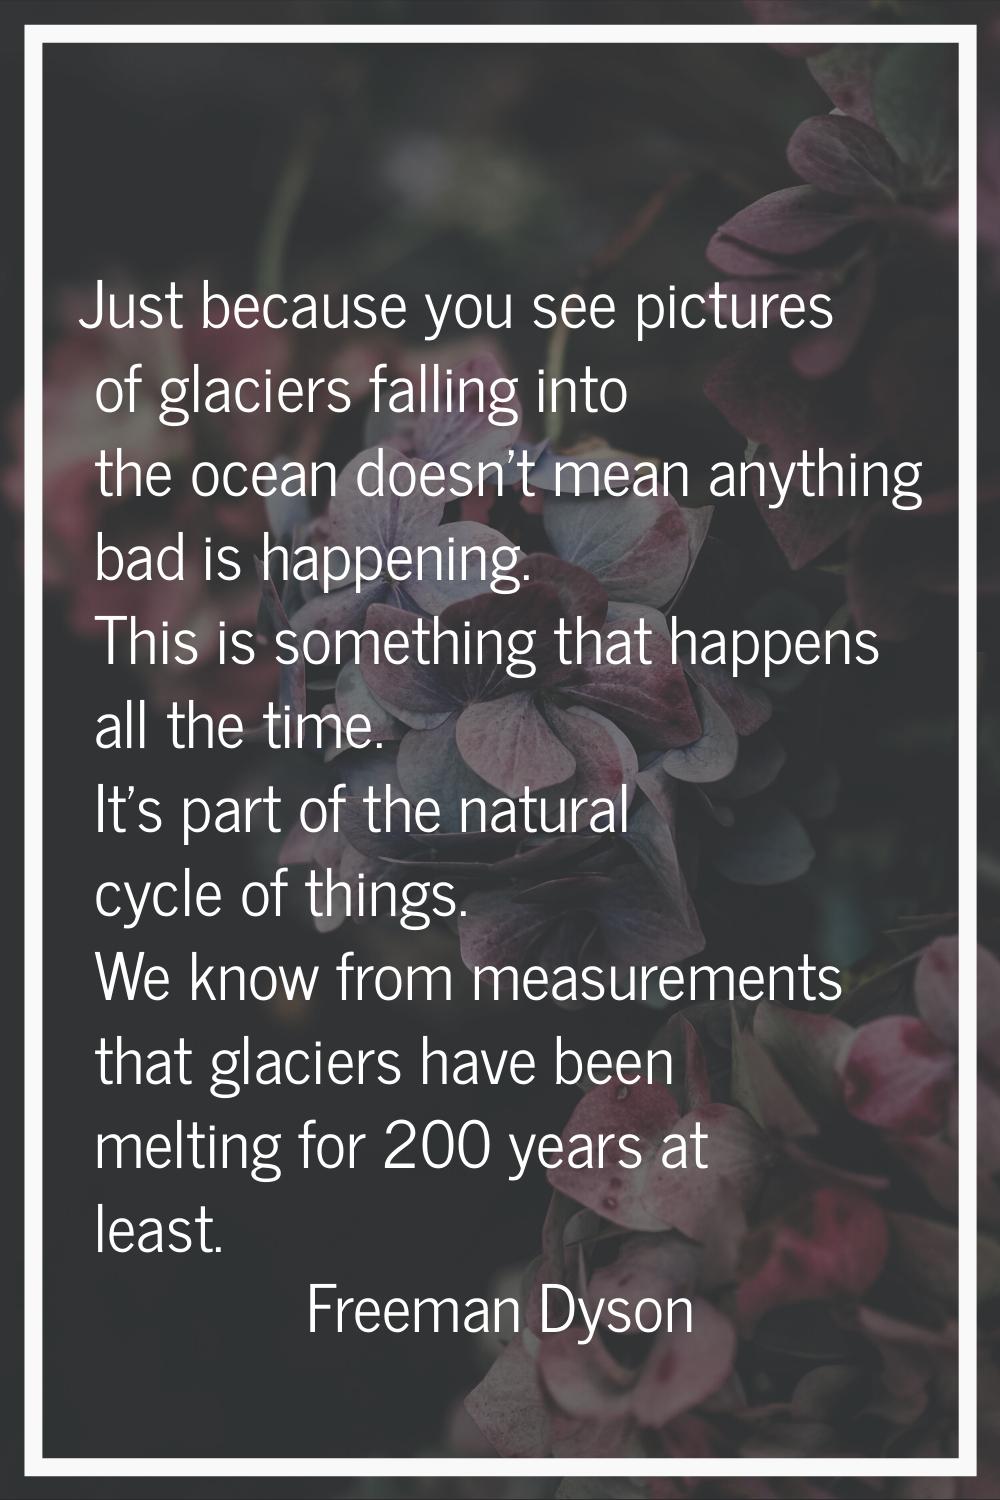 Just because you see pictures of glaciers falling into the ocean doesn't mean anything bad is happe